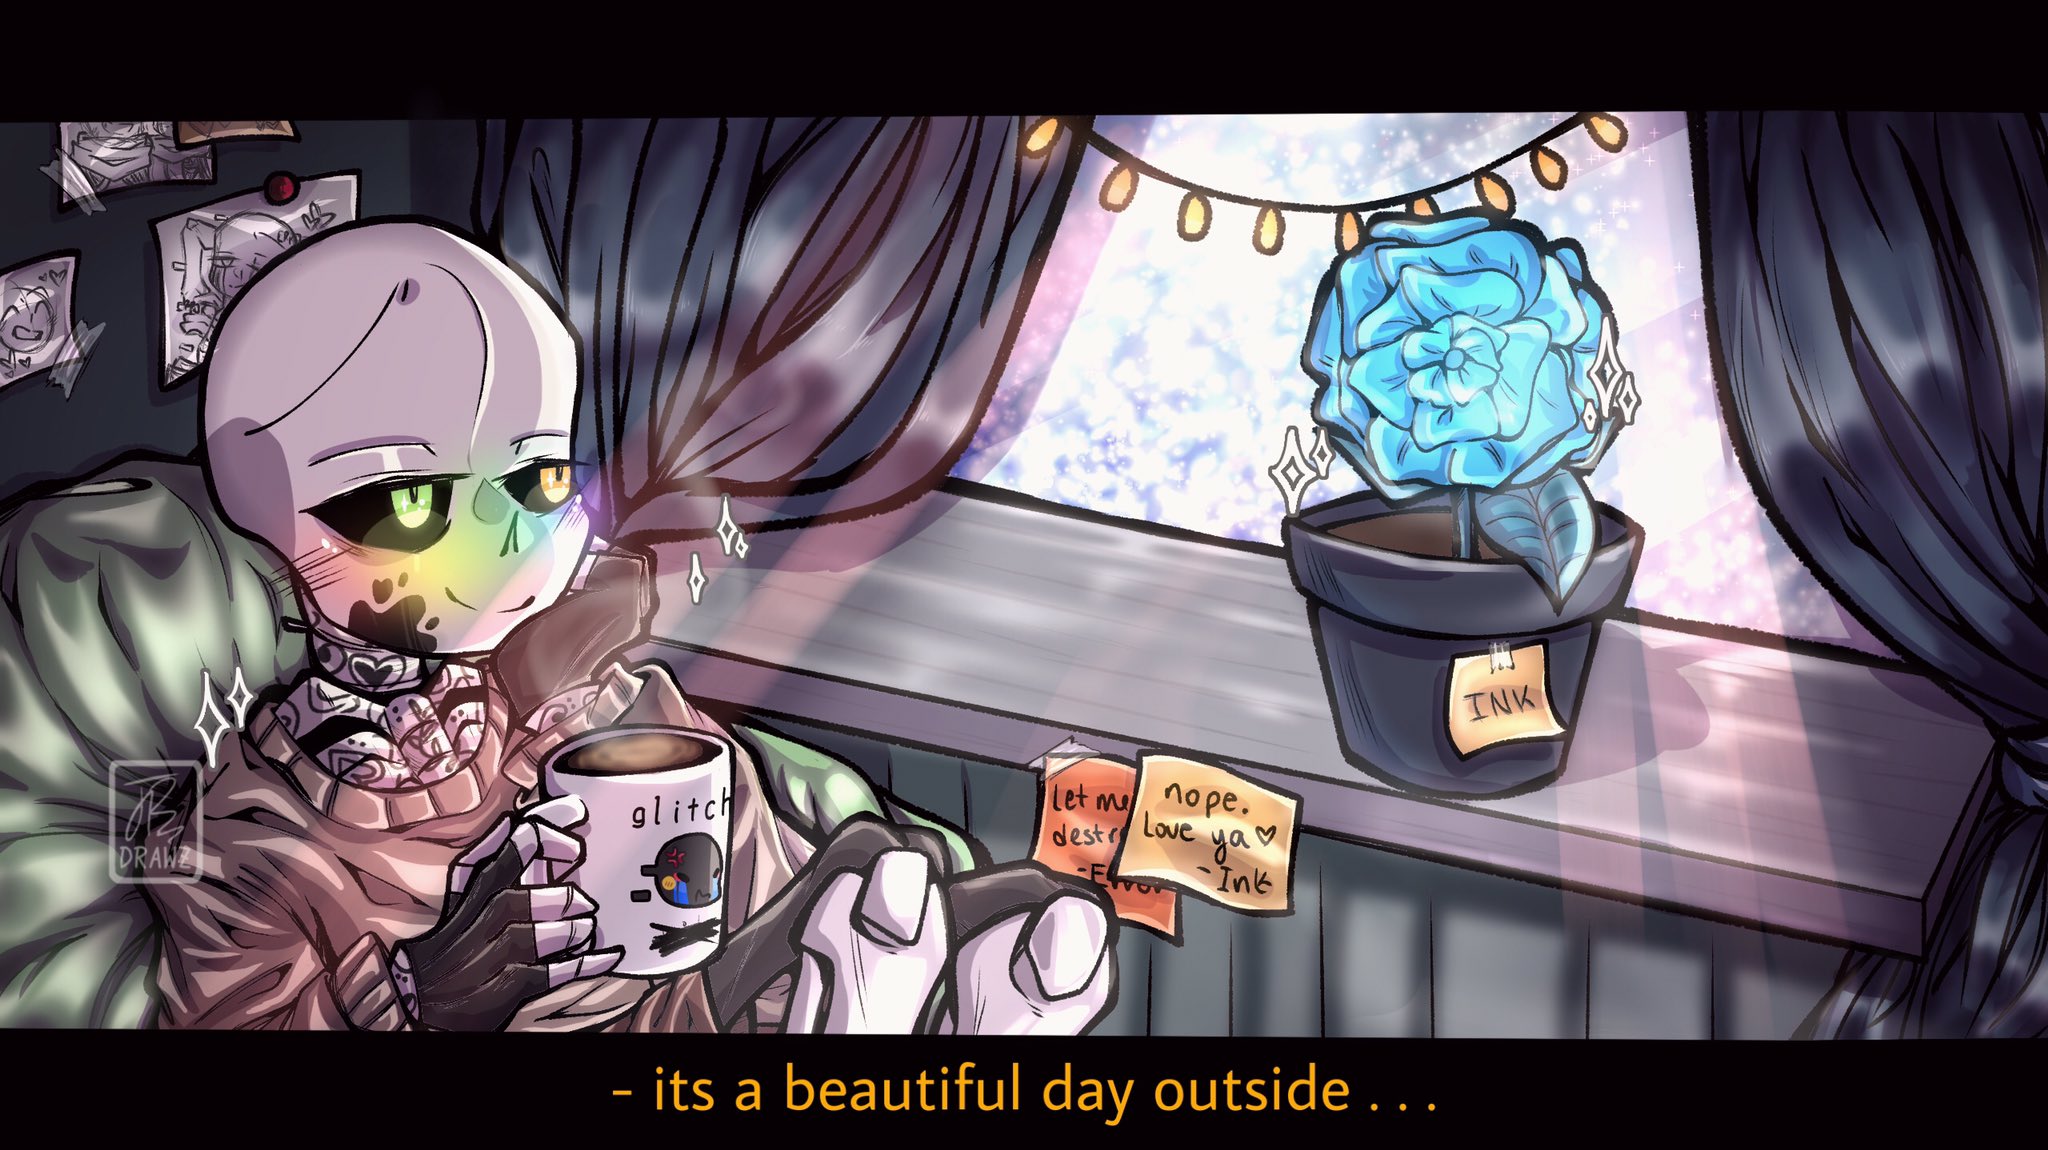 🍵💚 MIDORIMATCHA💚🍵 on X: JUST REALIZED IT WAS EPIC!SANS'S BIRTHDAY  HDKDHRJFH- CRIES- HOW DID I FORGET THEM aA A- sorry EmpireVerse error, I  shall draw you another day o7! Anyway- HAPPY BIRTHDAY